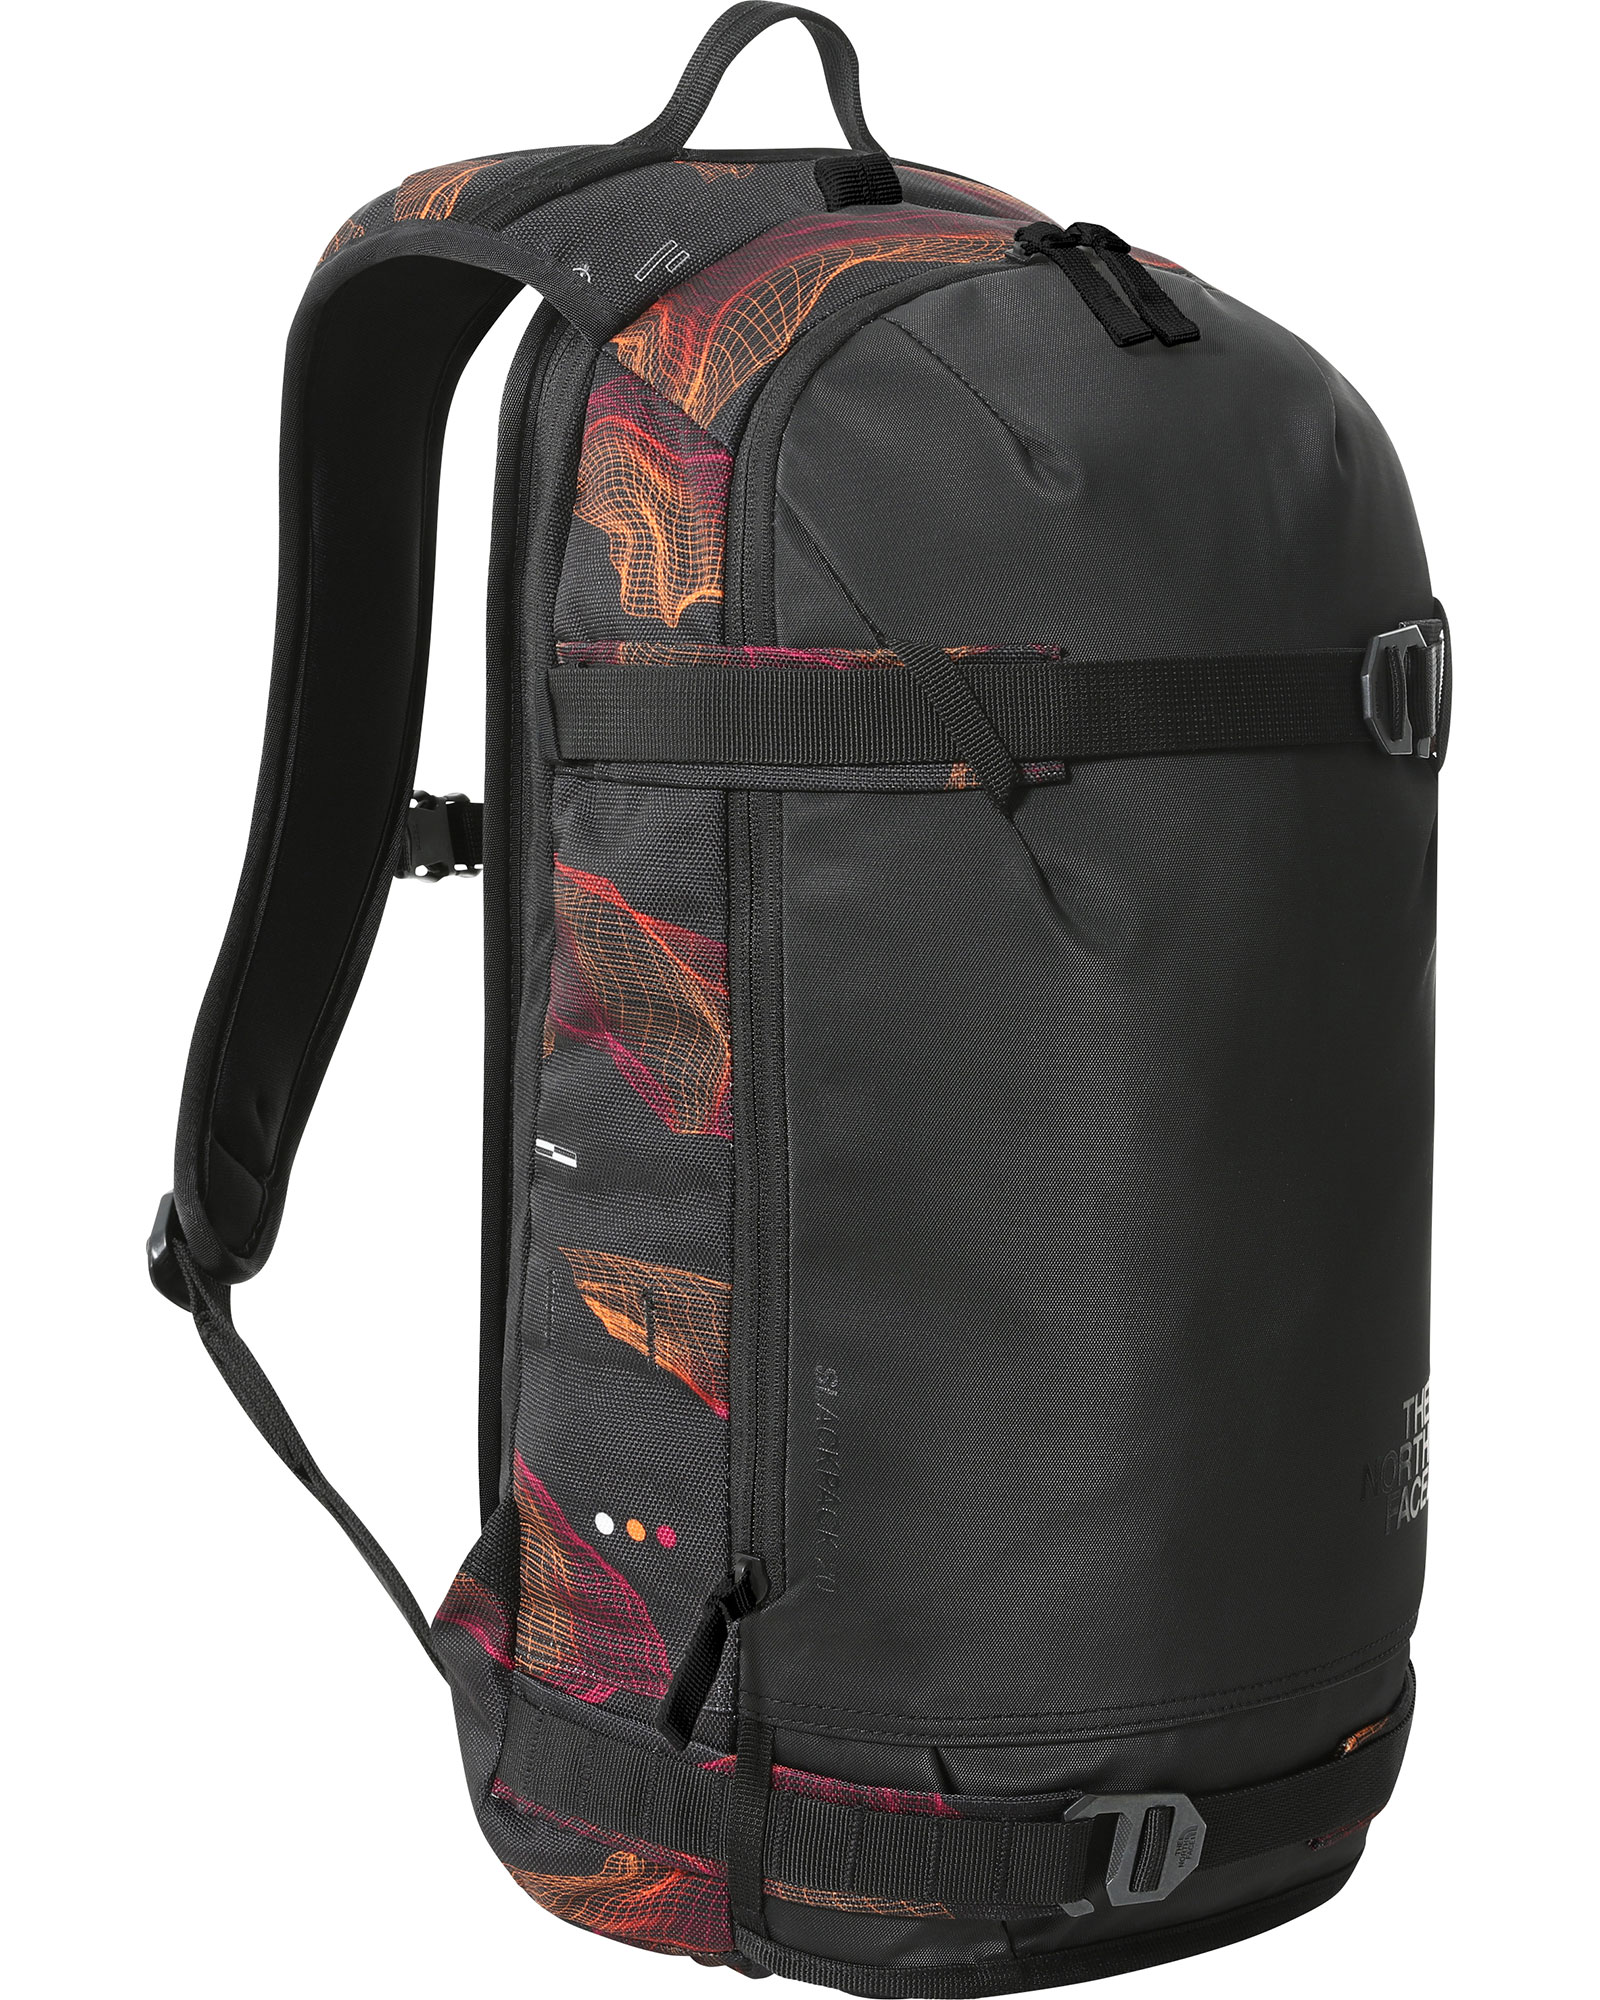 The North Face Women’s Slackpack 2.0 Expedition Backpack - TNF Black/Binary Halfdome Print